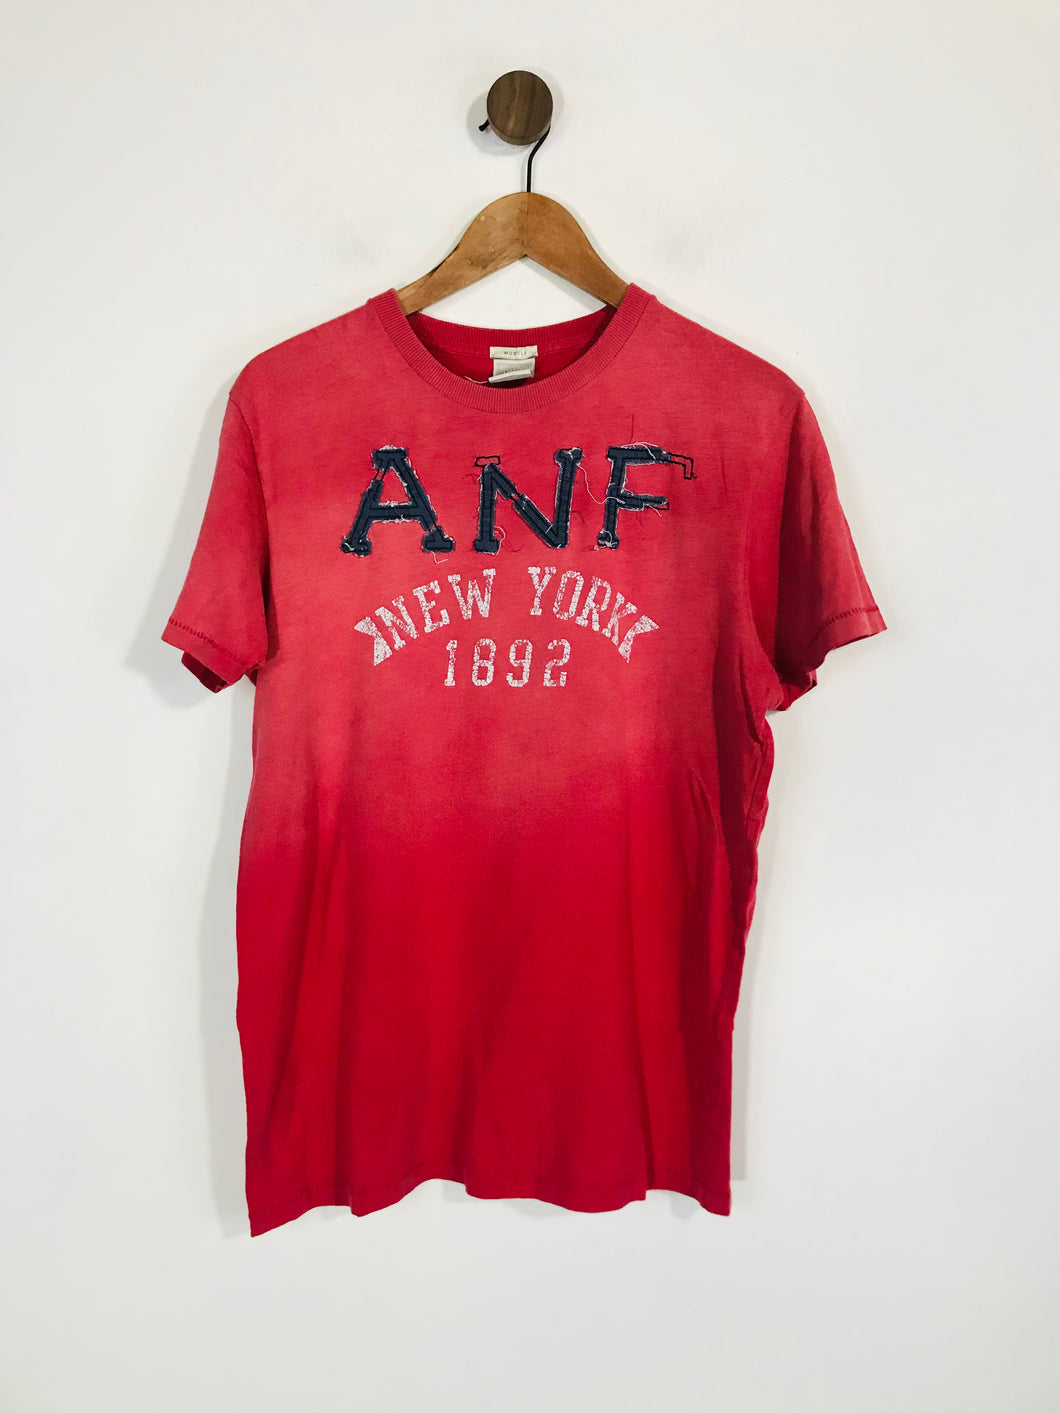 Abercrombie & Fitch Men's T-Shirt | L | Red